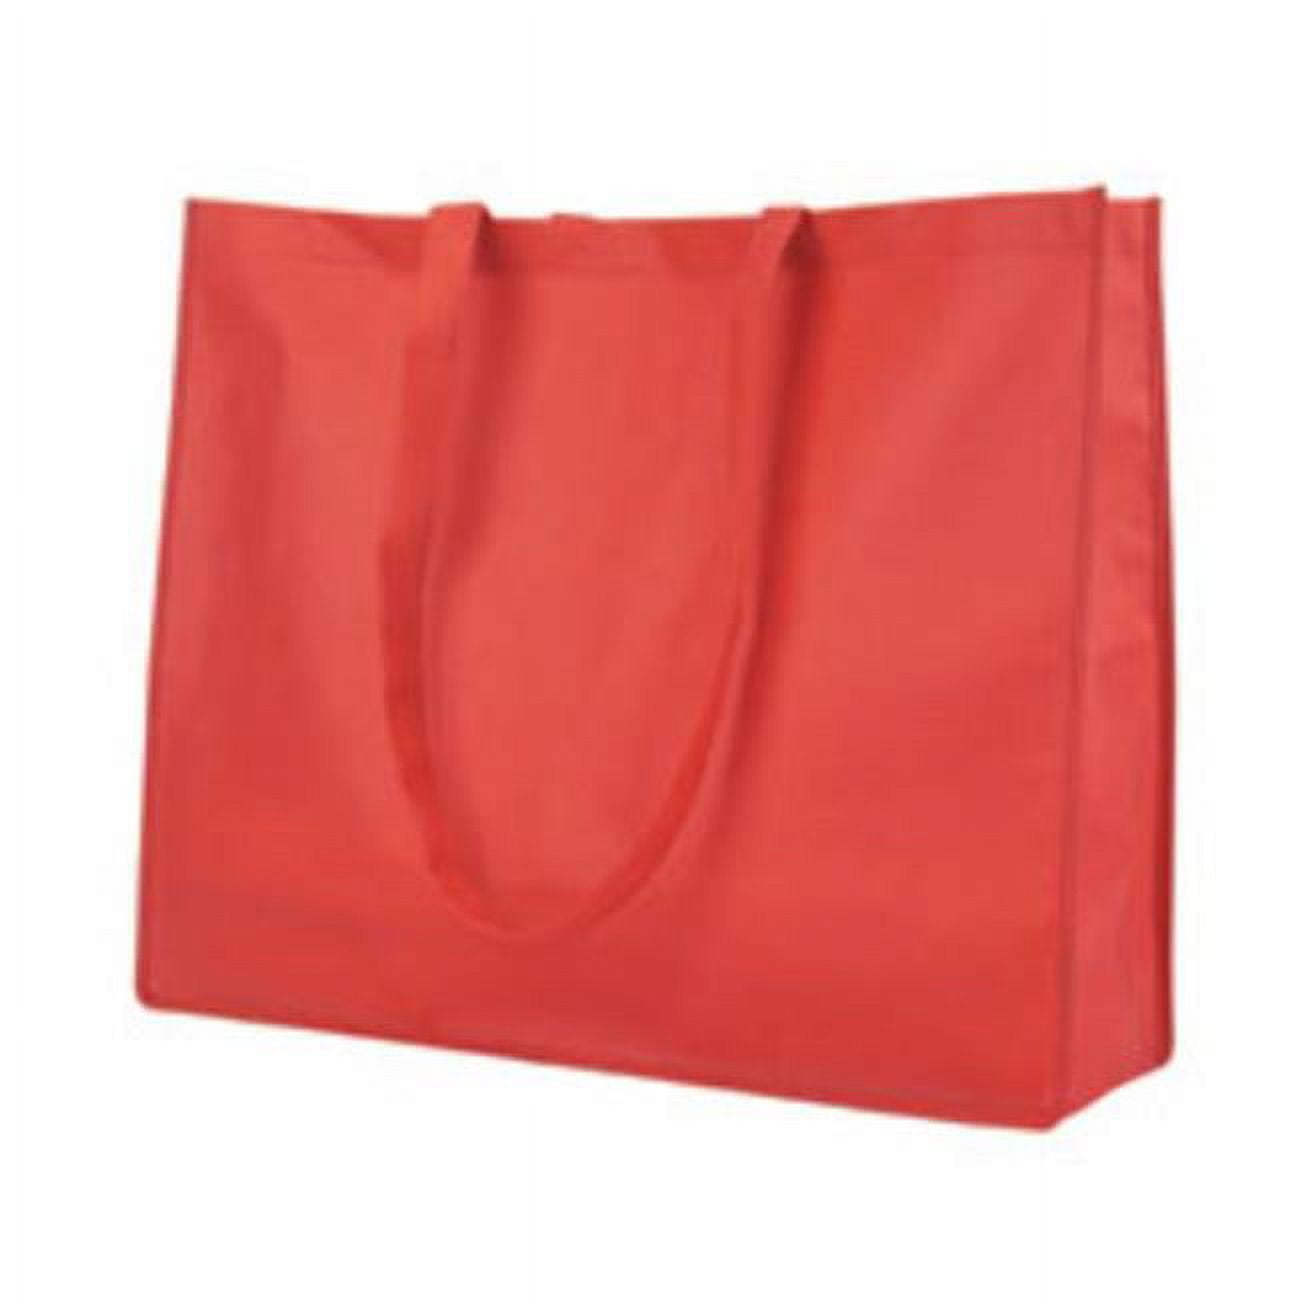 2333803 Tote Bag - Red, Extra Large - Case Of 120